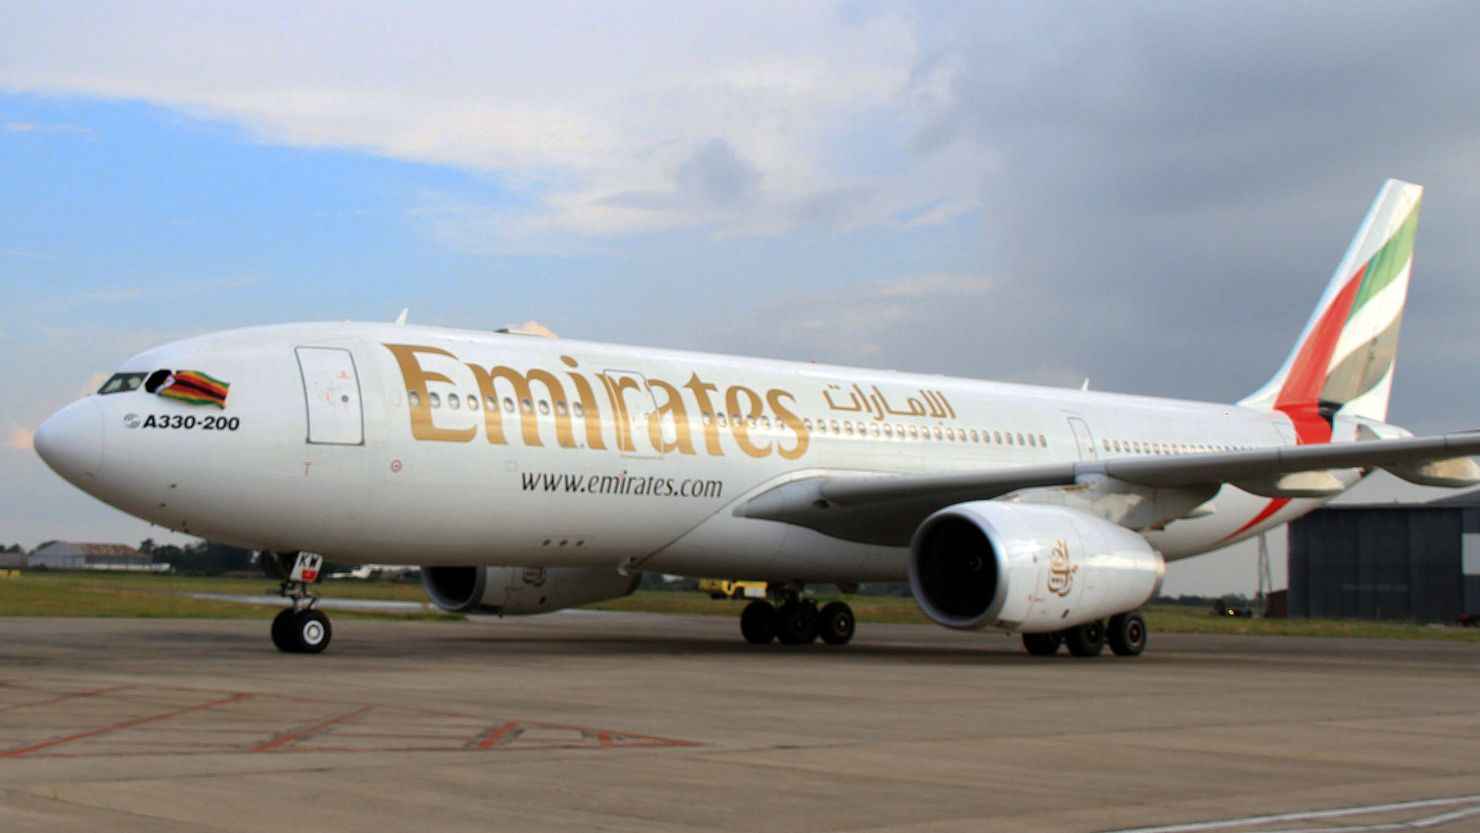 An  A330-200 Airbus plane of Emirates airline 